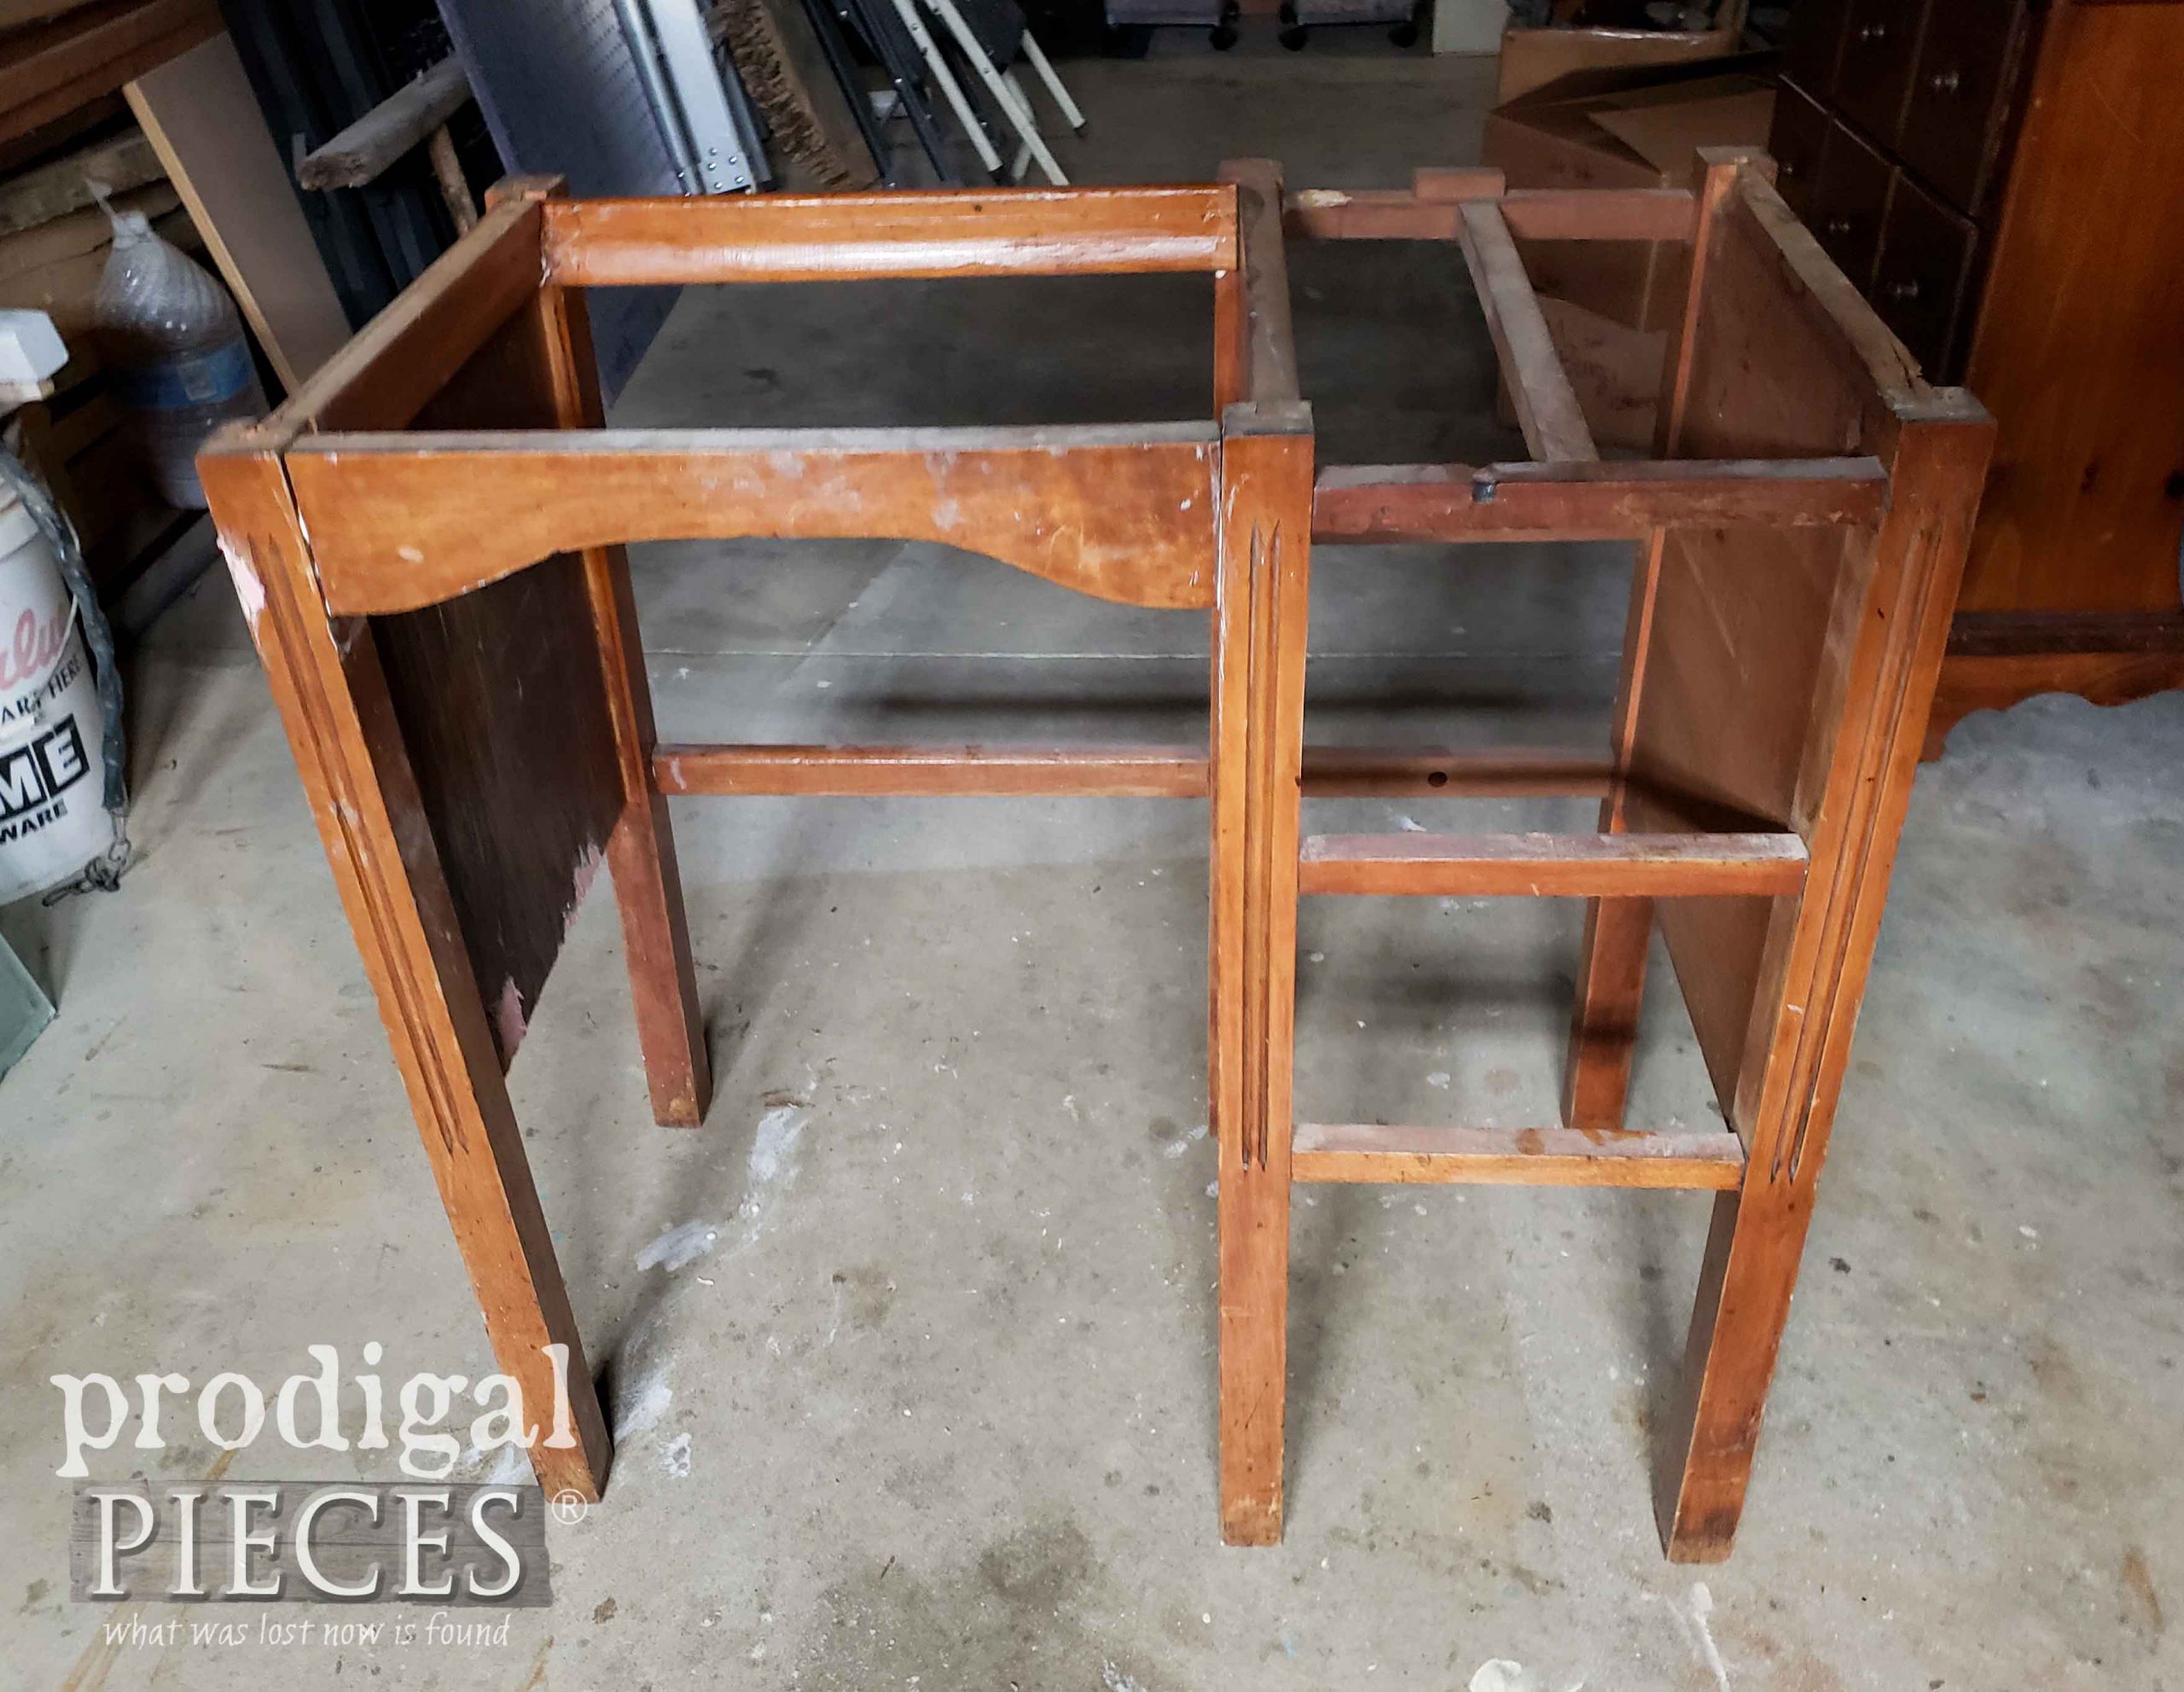 Empty Kid's Desk Frame for Upcycled Play Kitchen | prodigalpieces.com